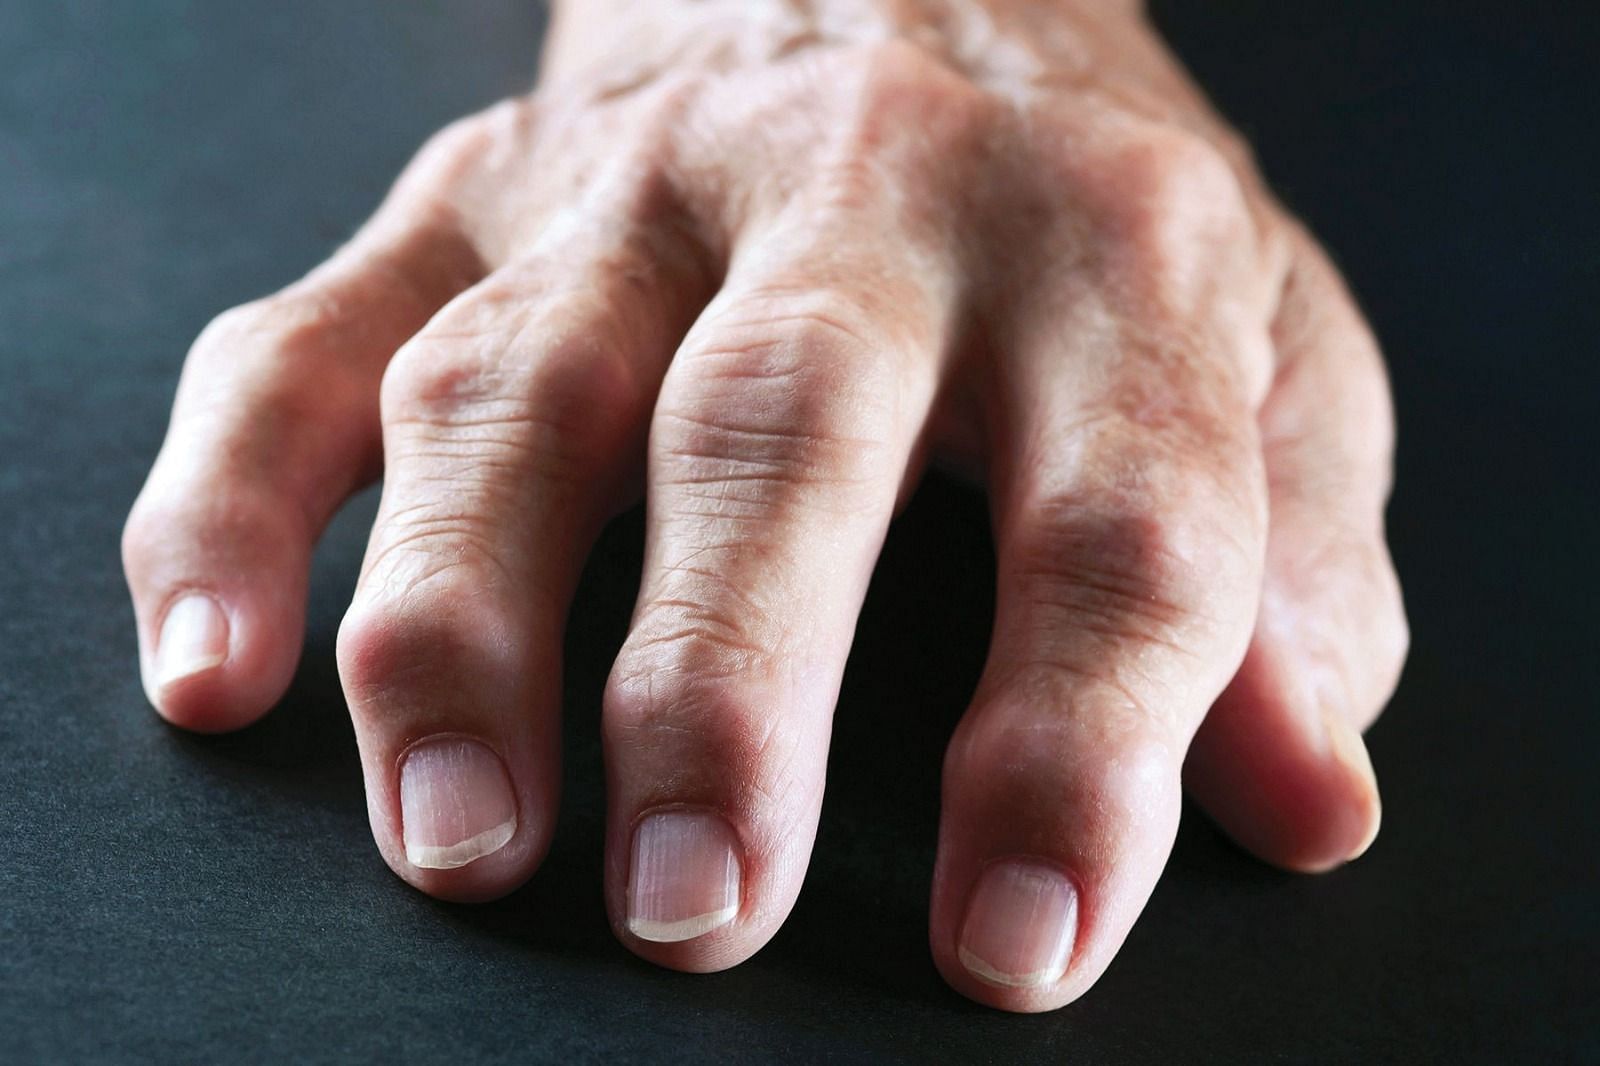 Arthritis in a human hand (Image via Getty Images)